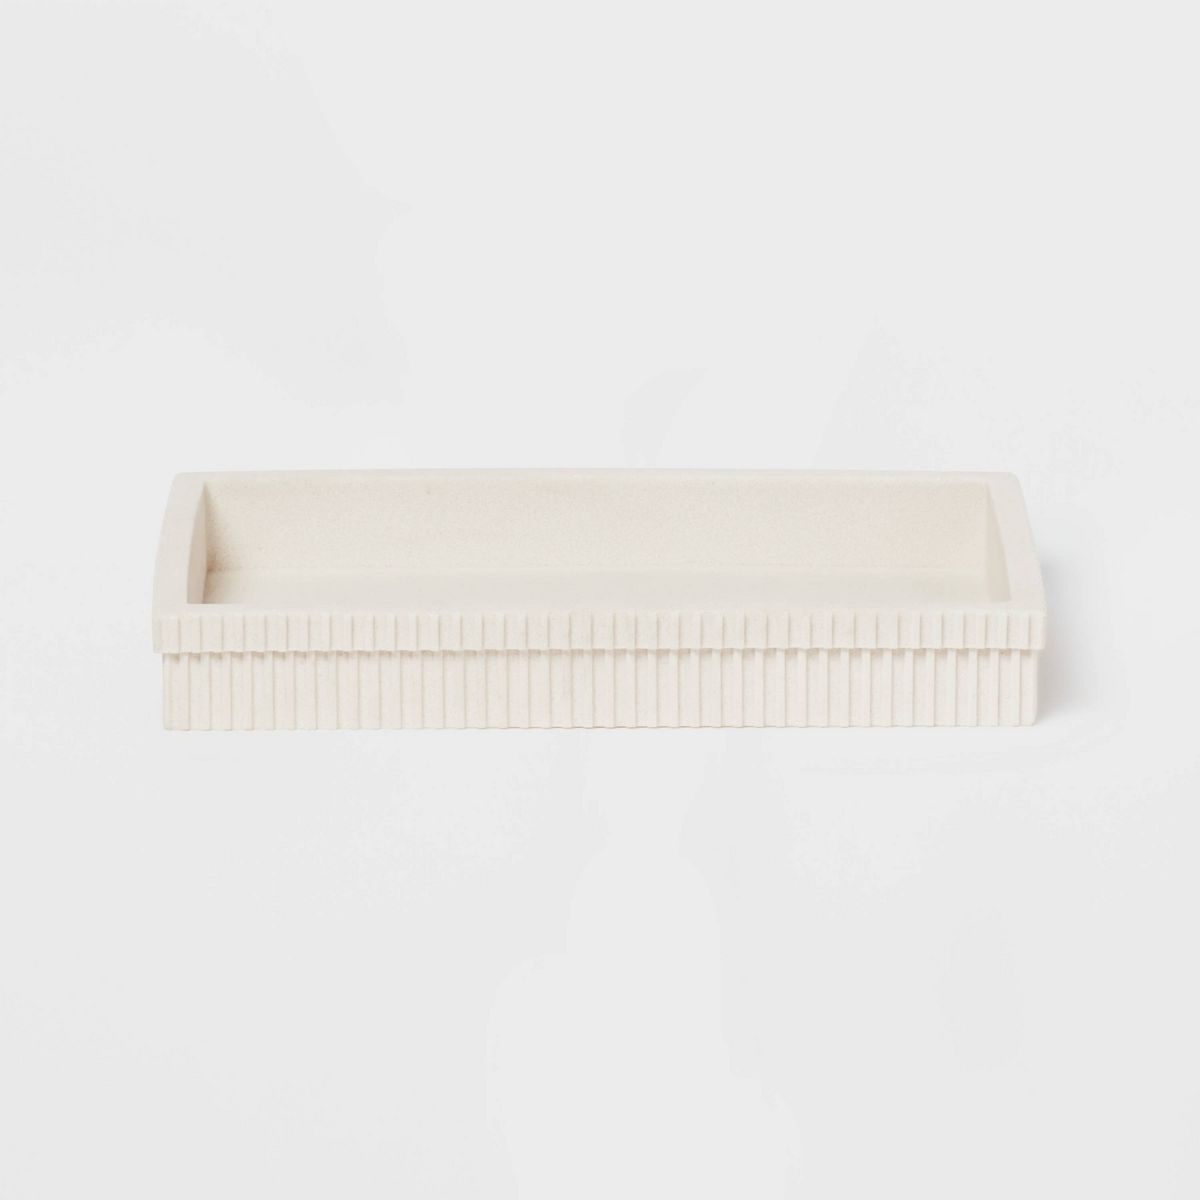 Ribbed Bath Tray White - Room Essentials™ | Target